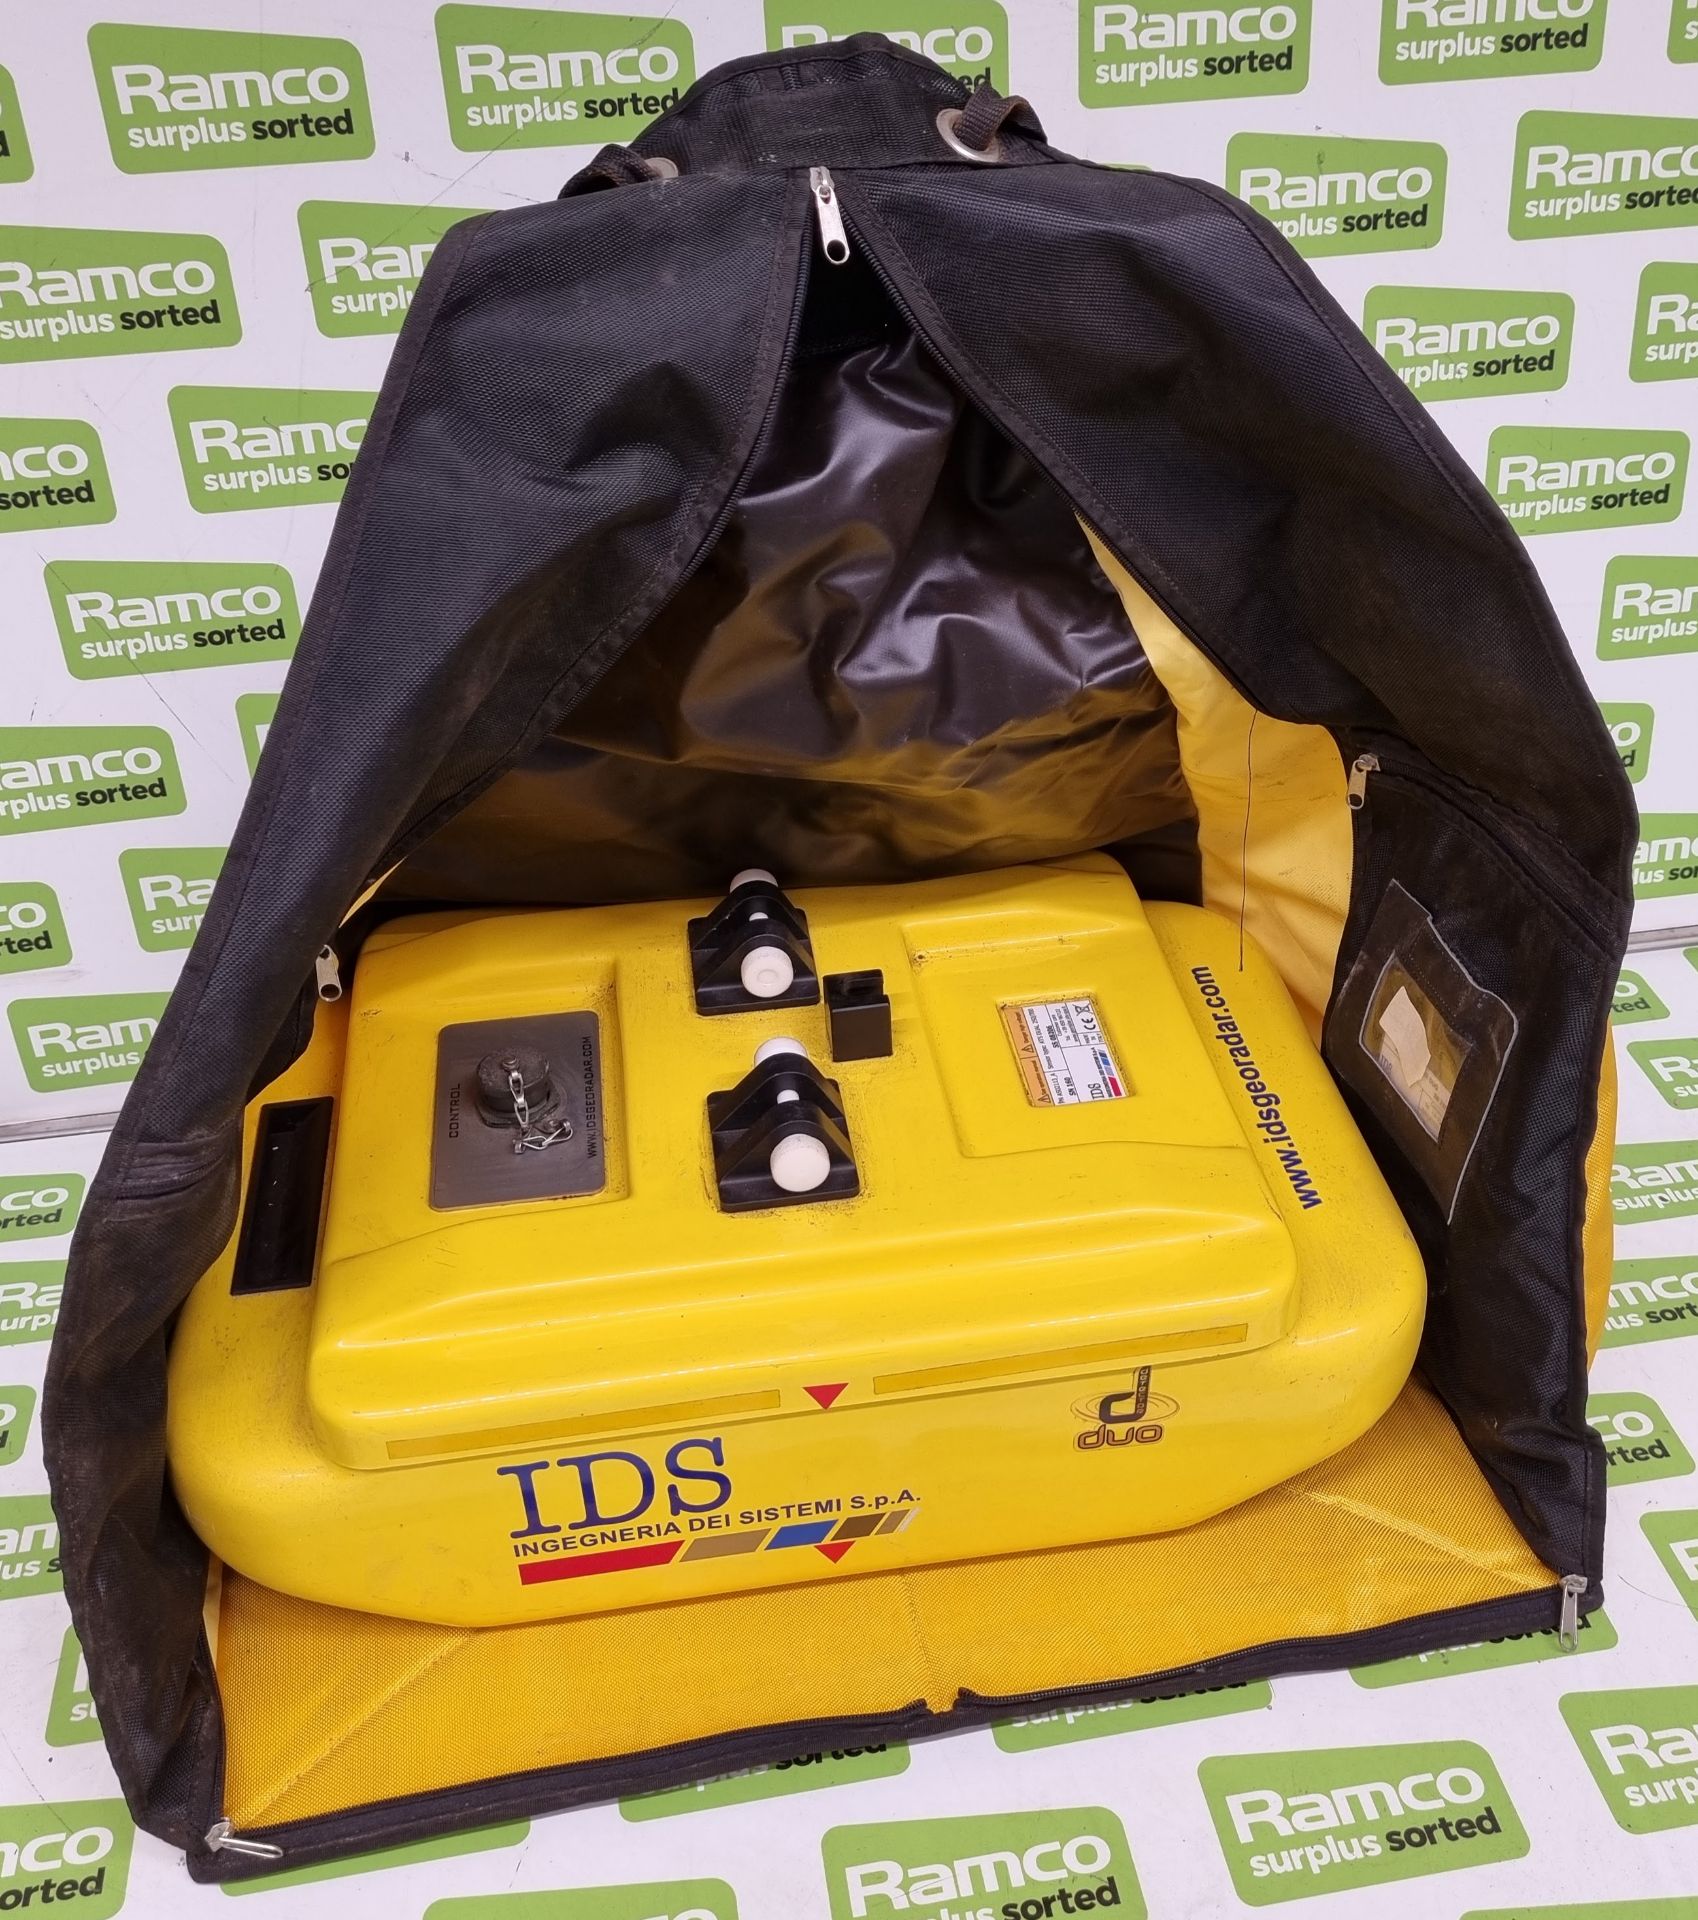 IDS Detector Duo ground-penetrating radar equipment with accessories - Image 23 of 40